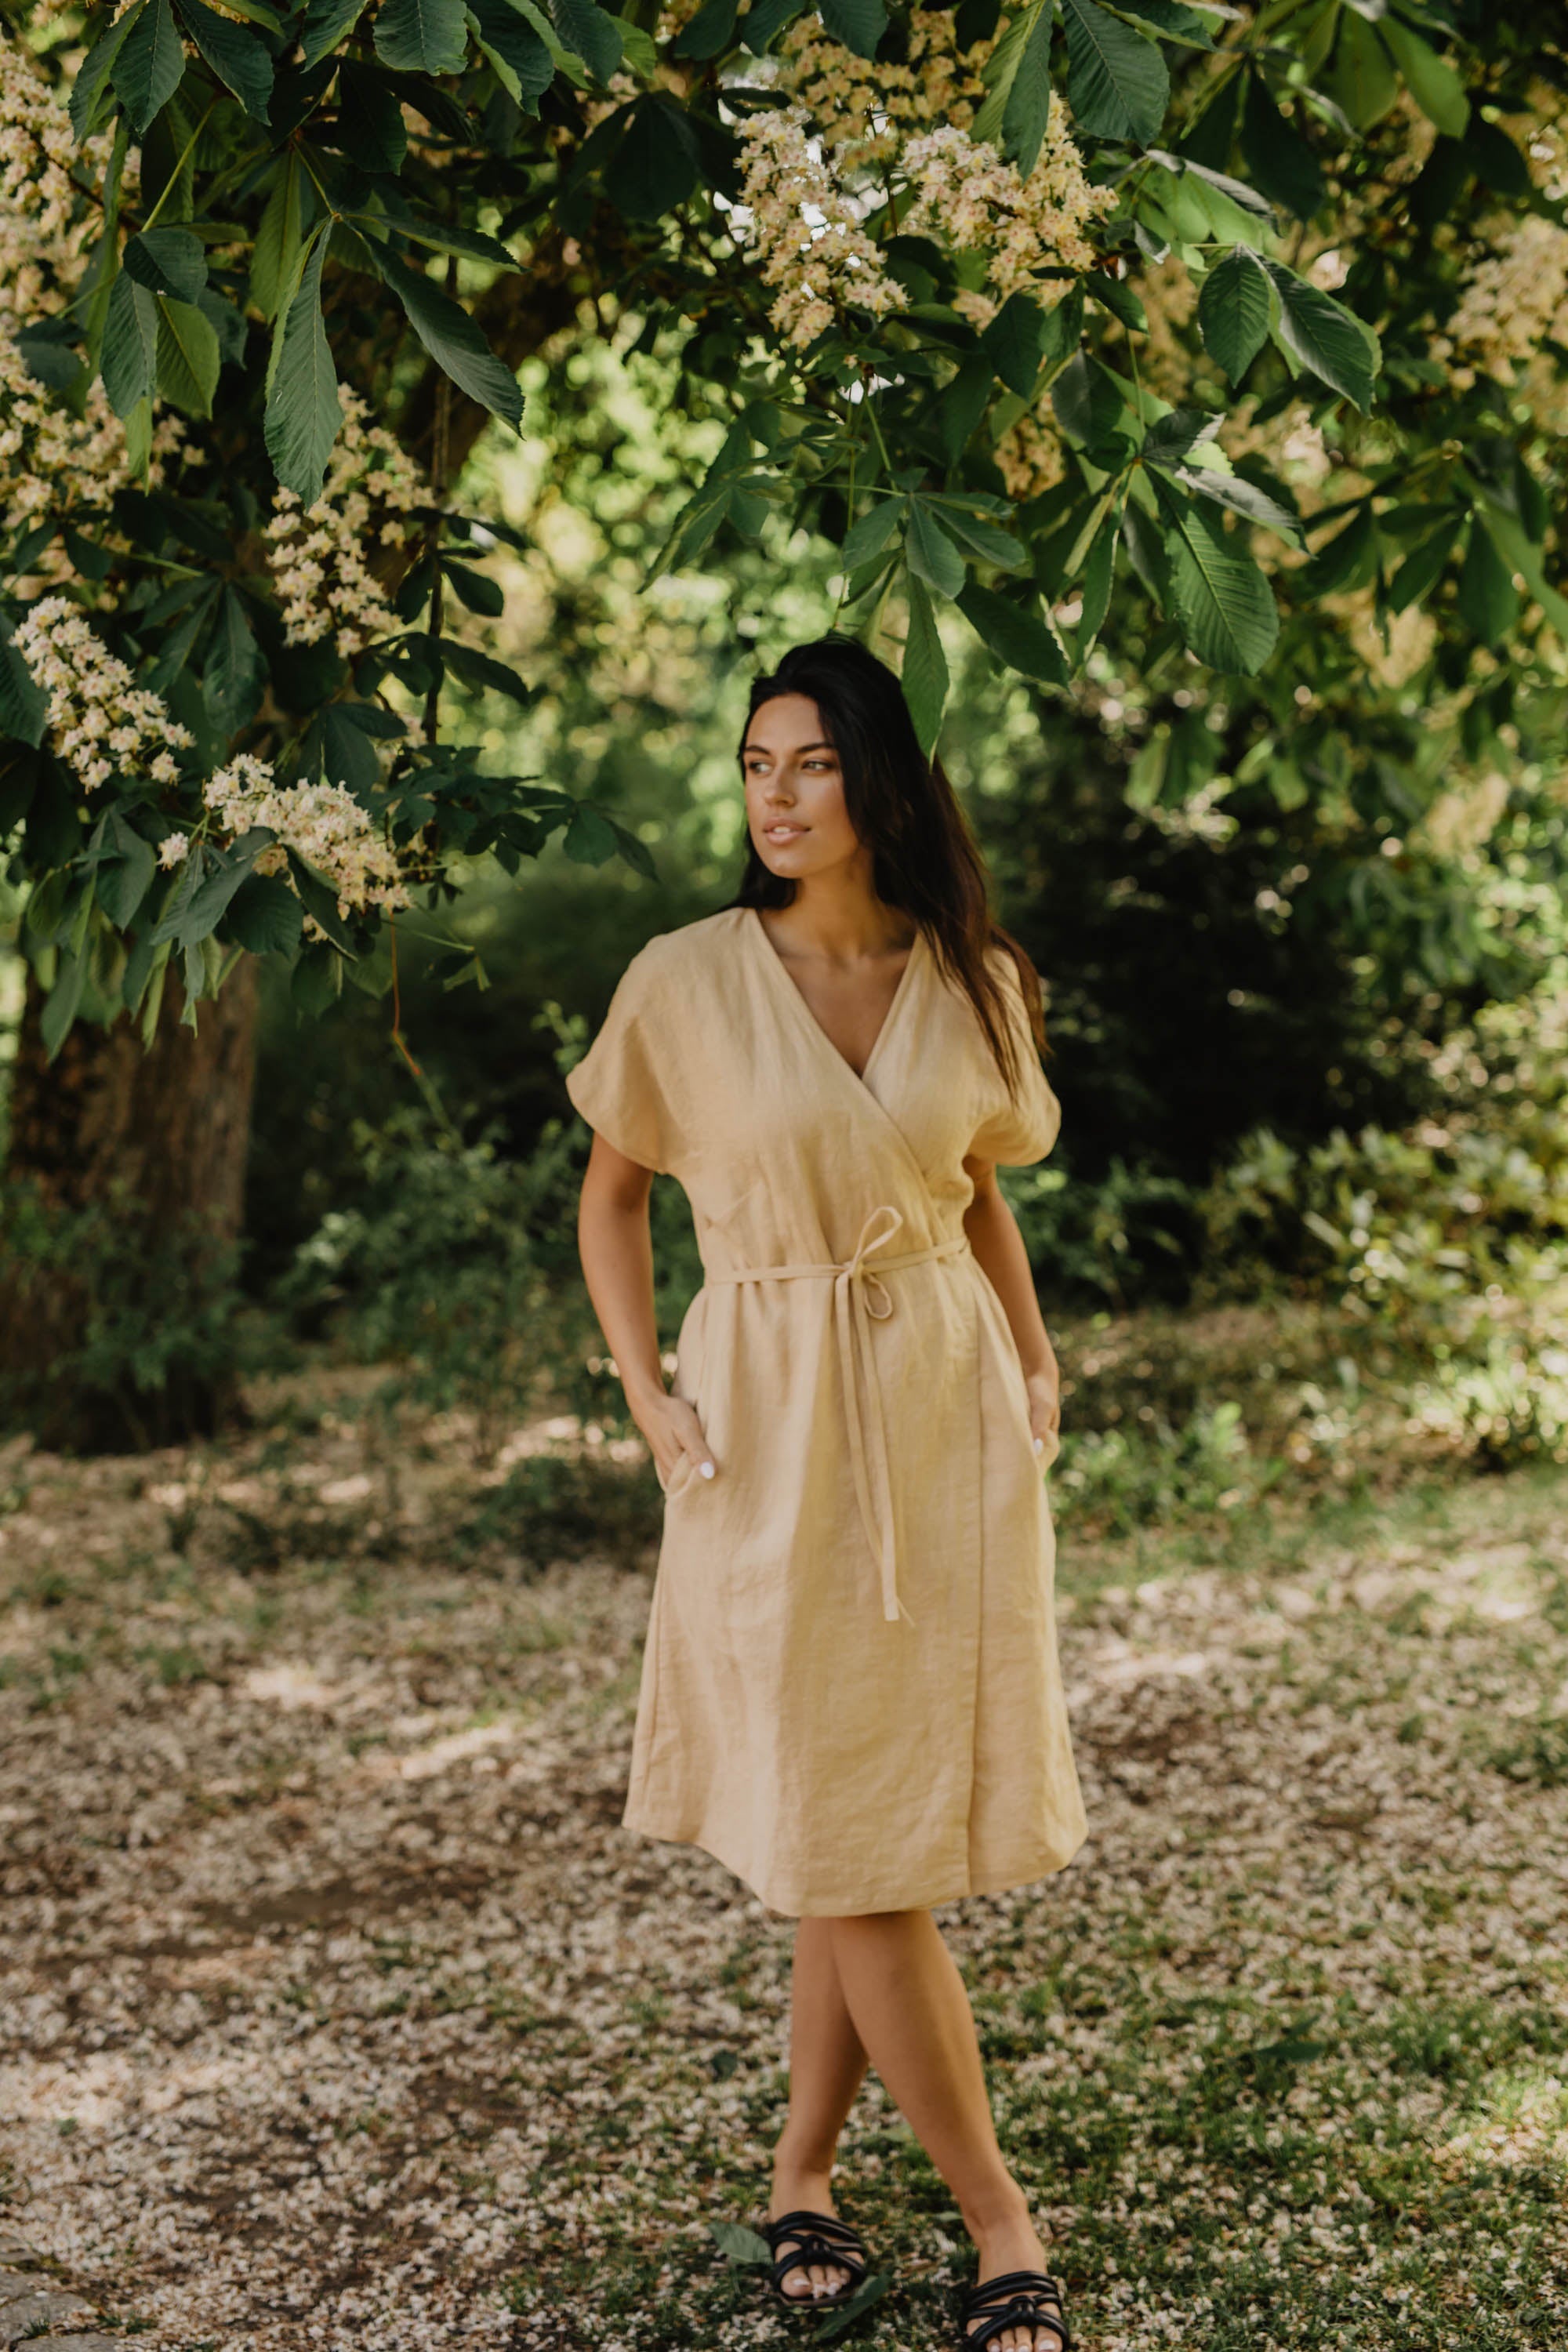 Woman In Nature Wearing A Yellow Linen Dress